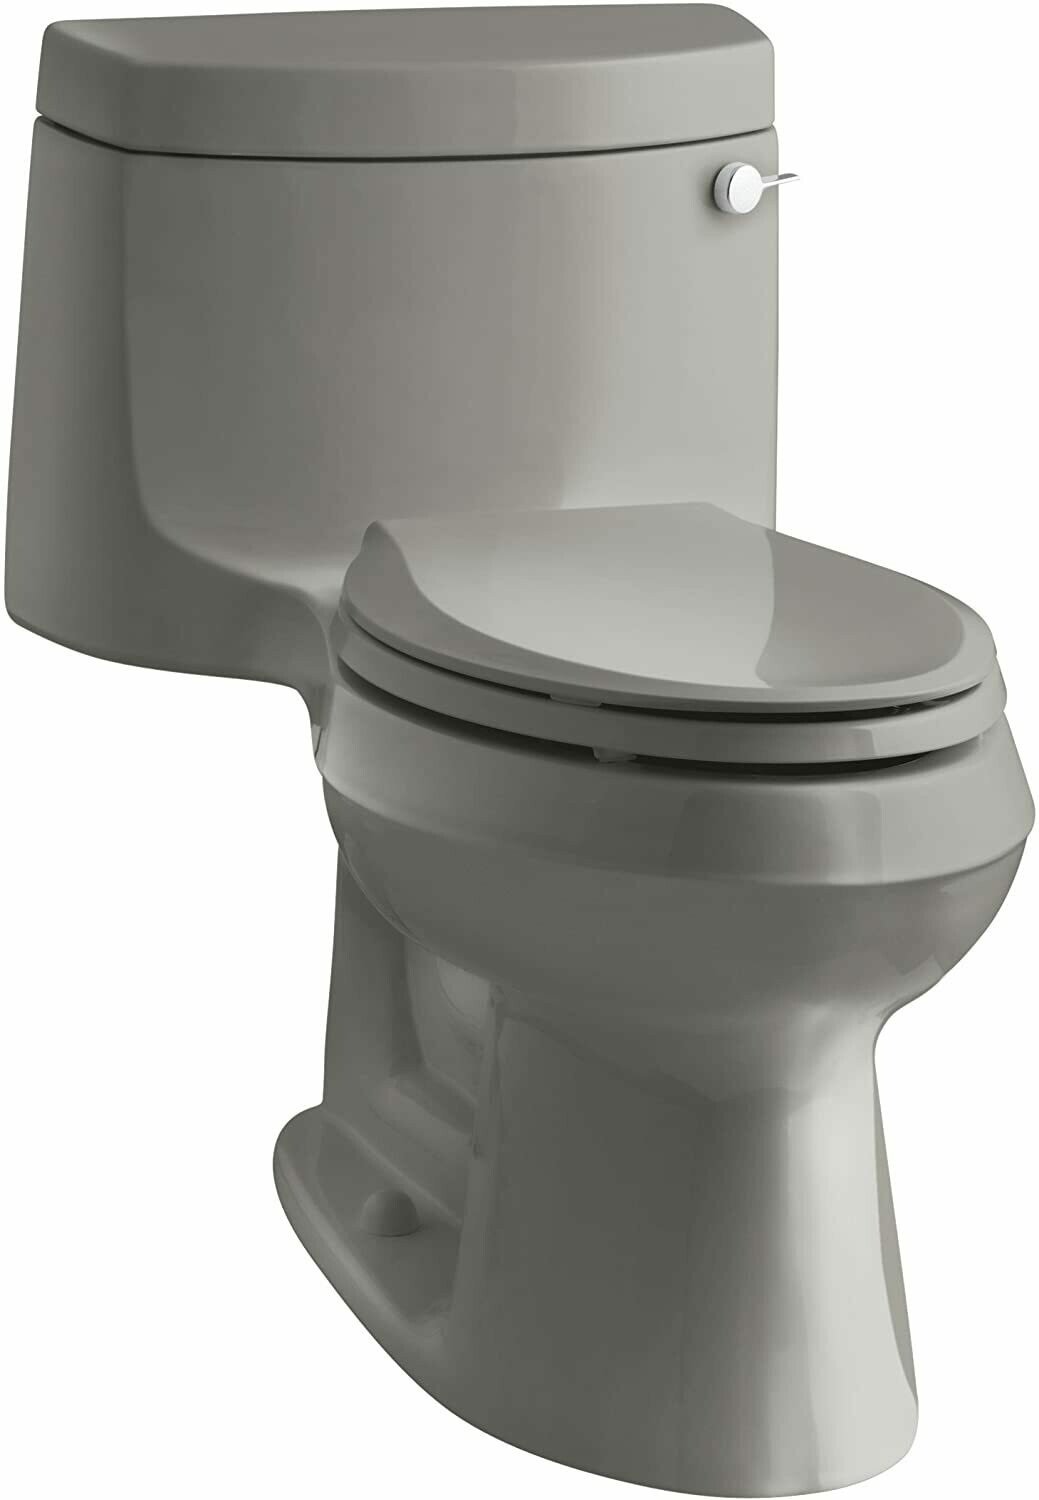 KOHLER K-3828-RA-96   Cimarron Comfort Height One-Piece Elongated 1.28 GPF Toilet with Aqua Piston Flush Technology and Right-Hand Trip Lever Biscuit 